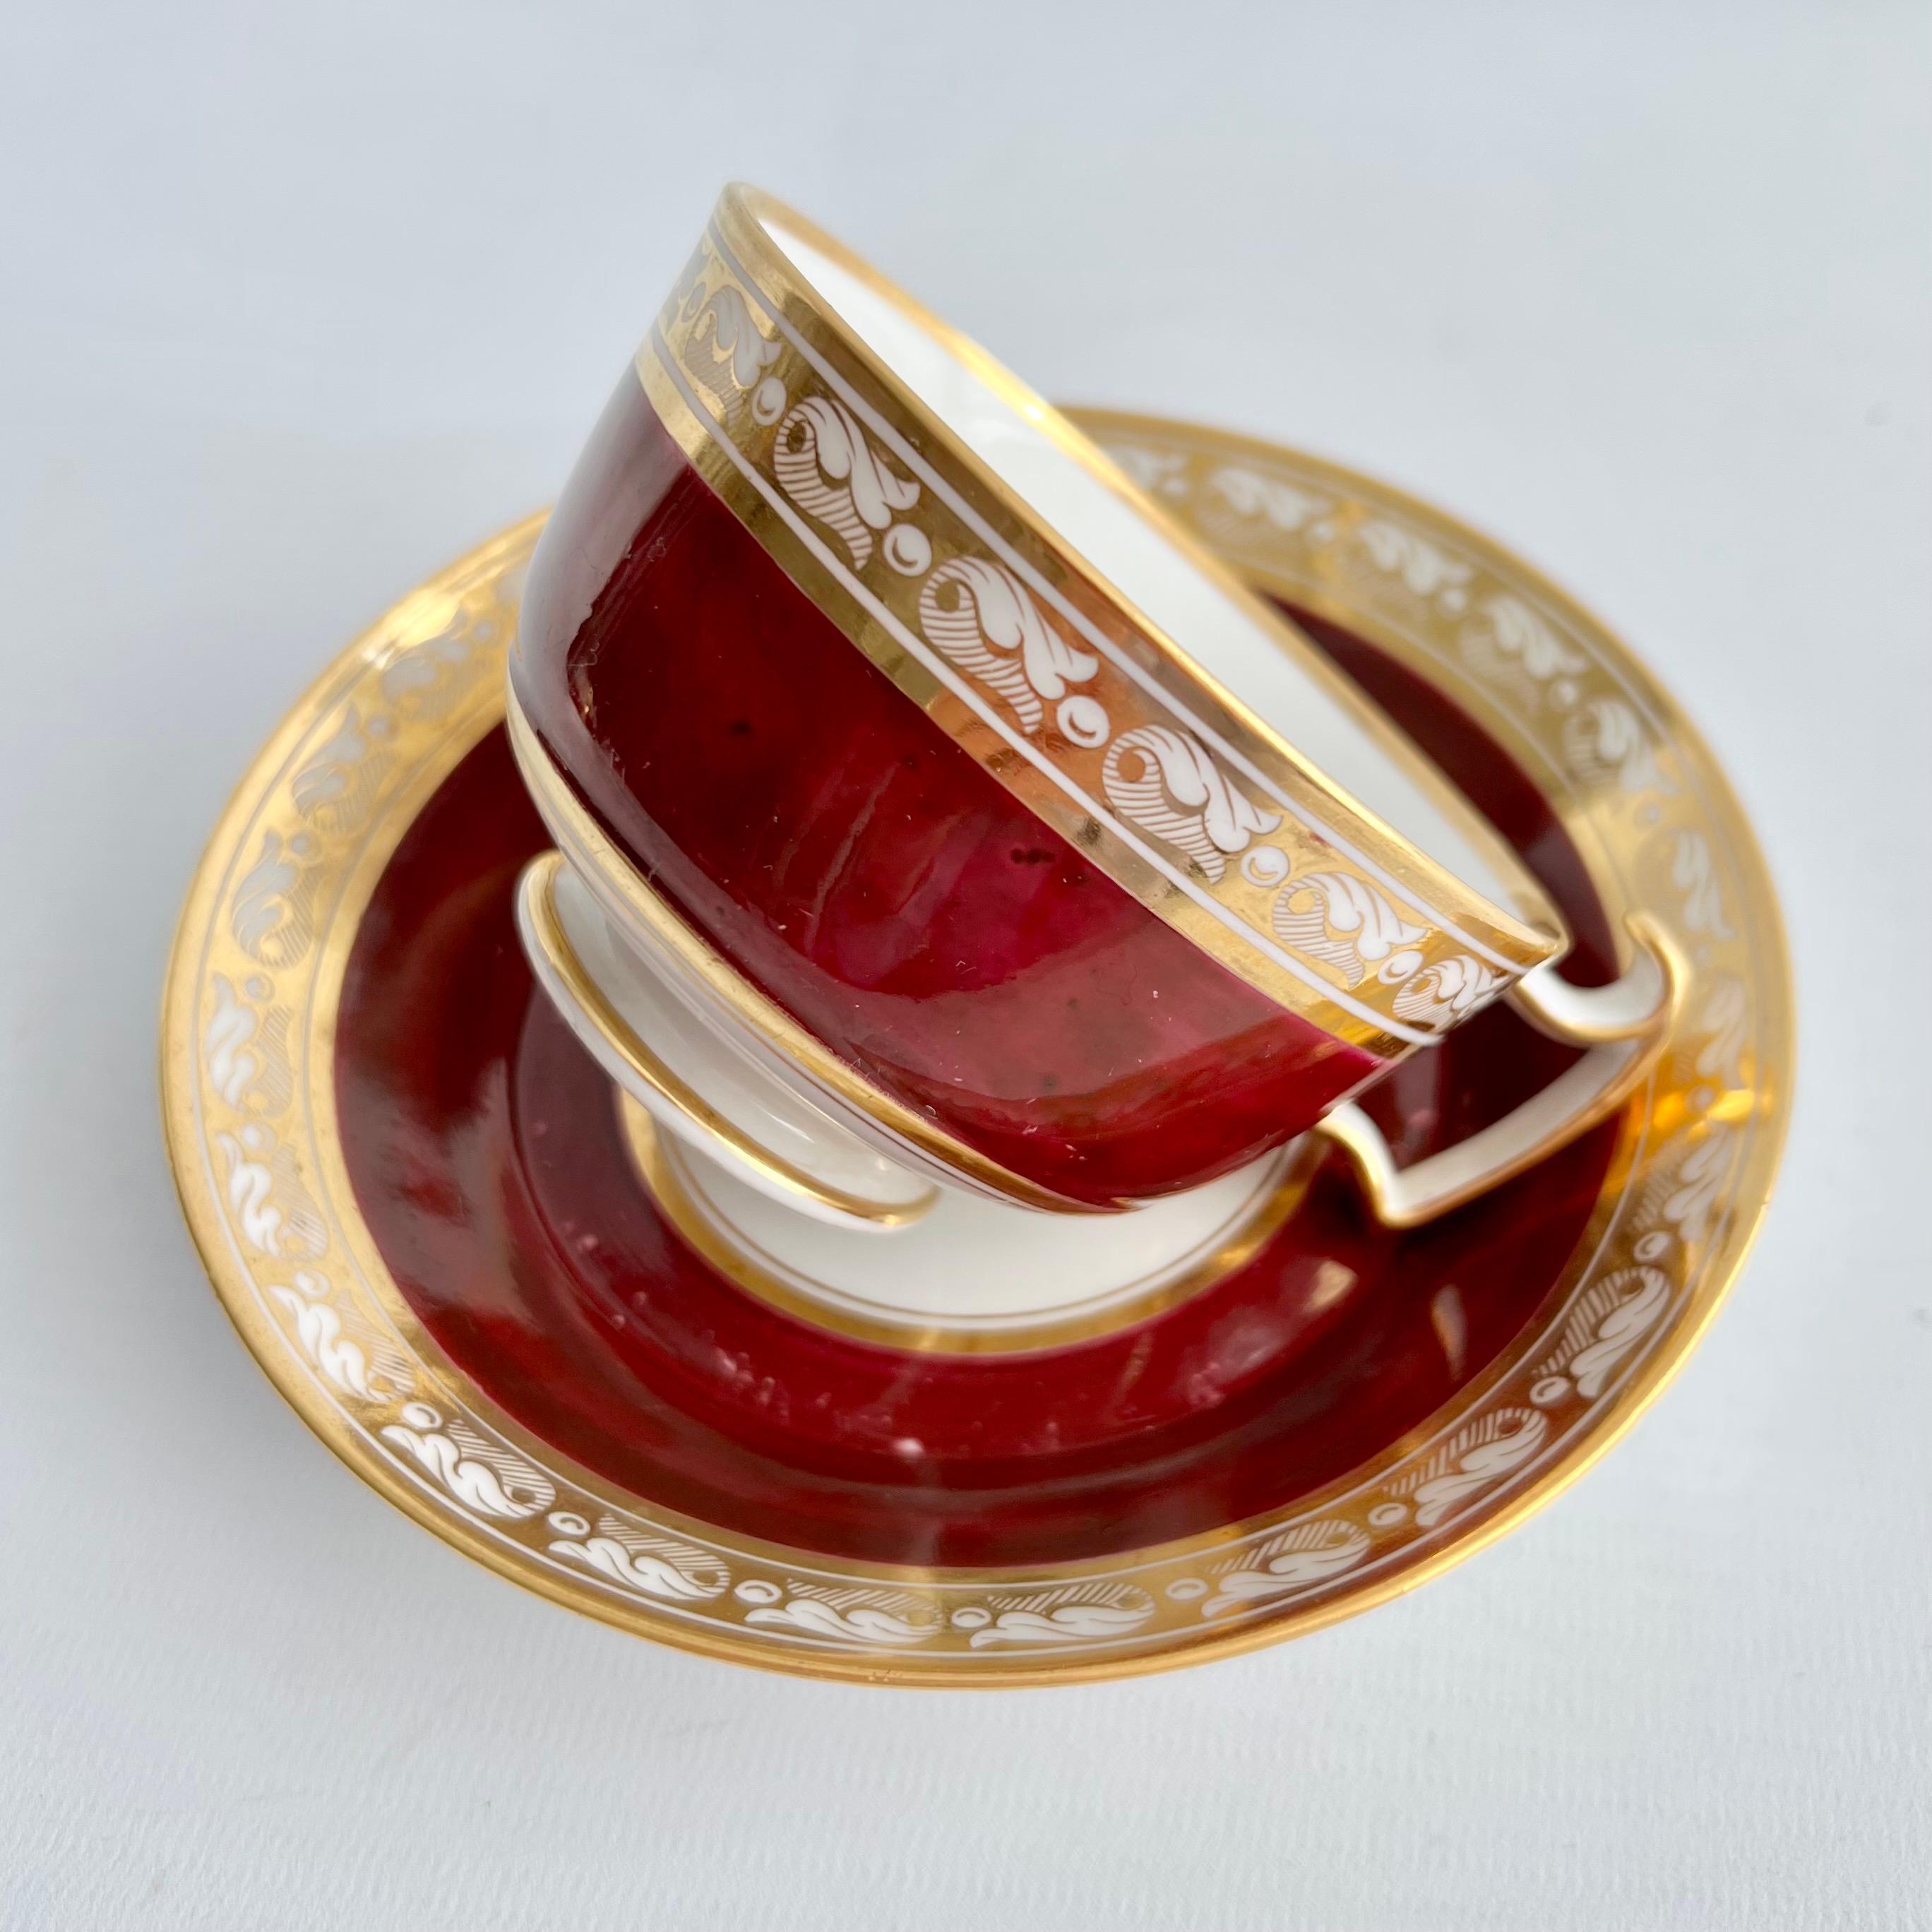 Hand-Painted Barr Flight & Barr Teacup Trio, Maroon and Gilt Neoclassical ca 1812